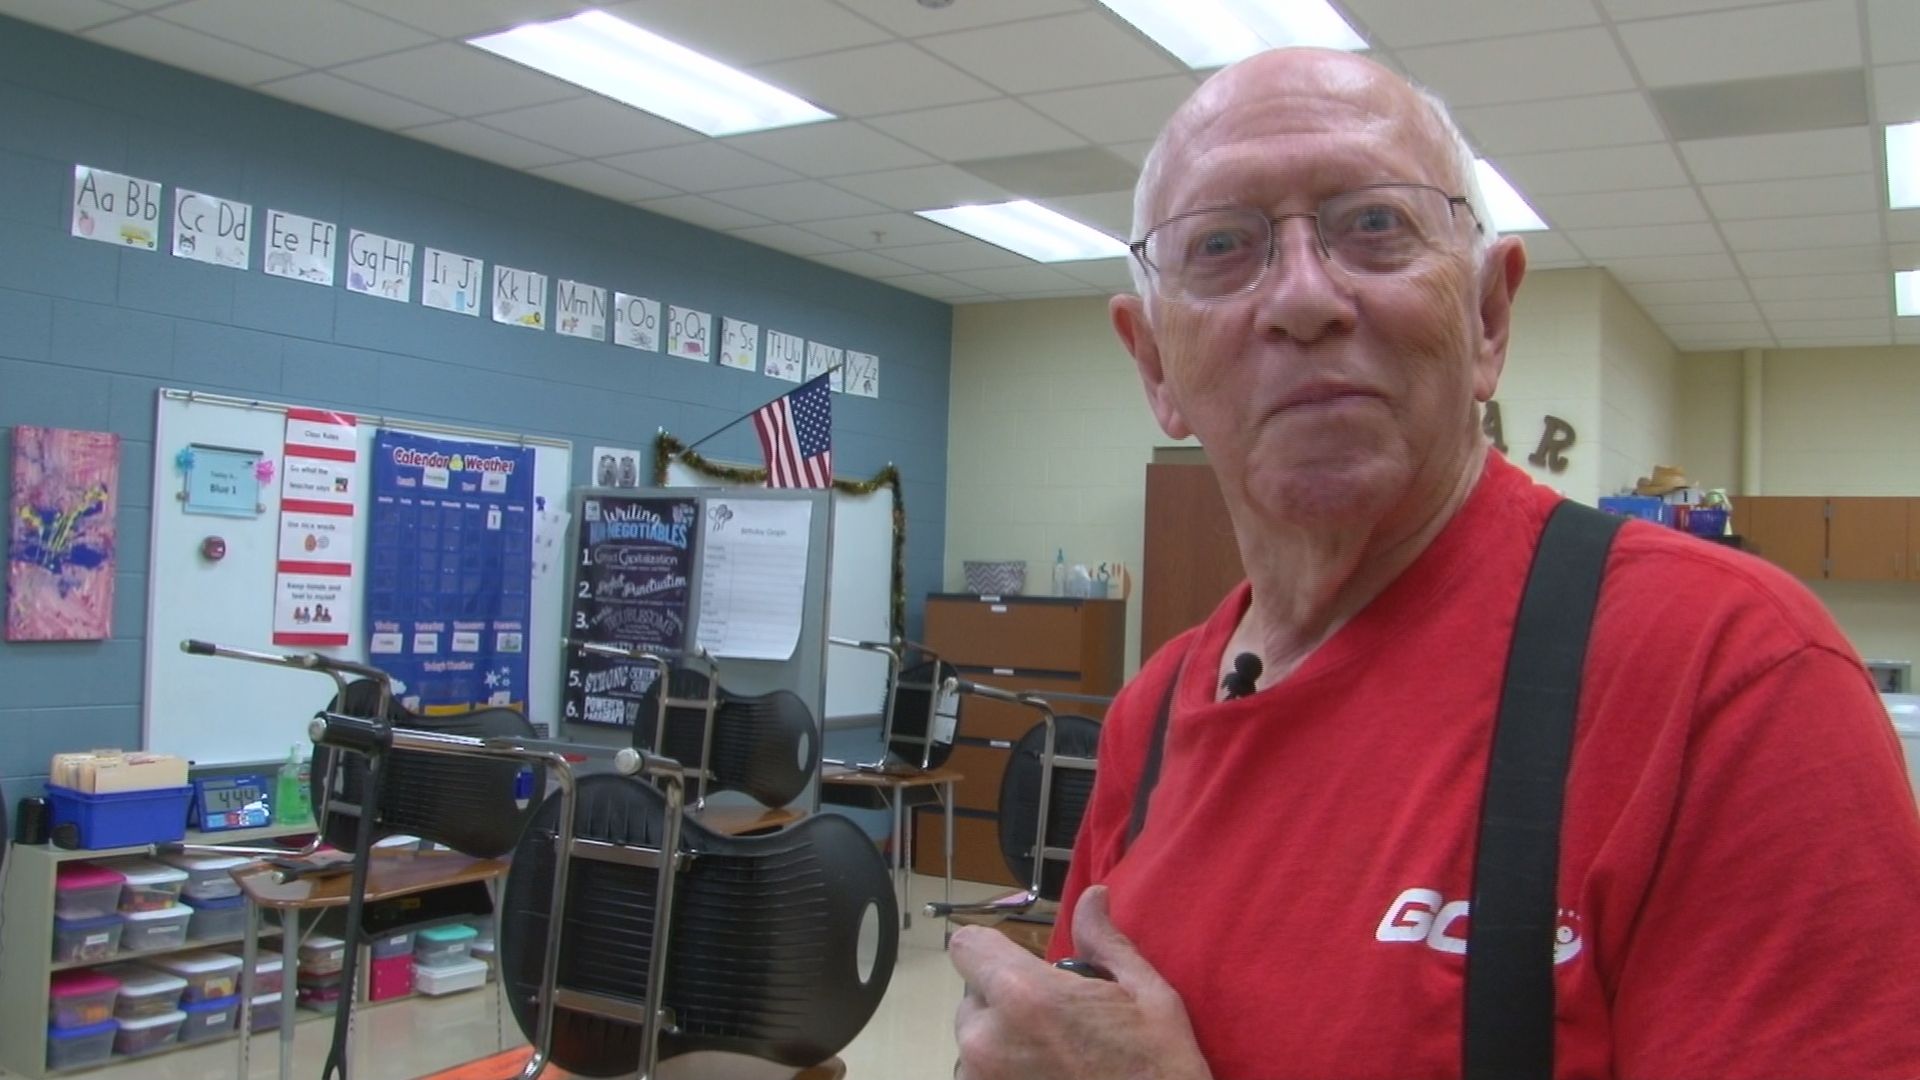 wbir.com | Local janitor used to work for NASA, recovering from stroke